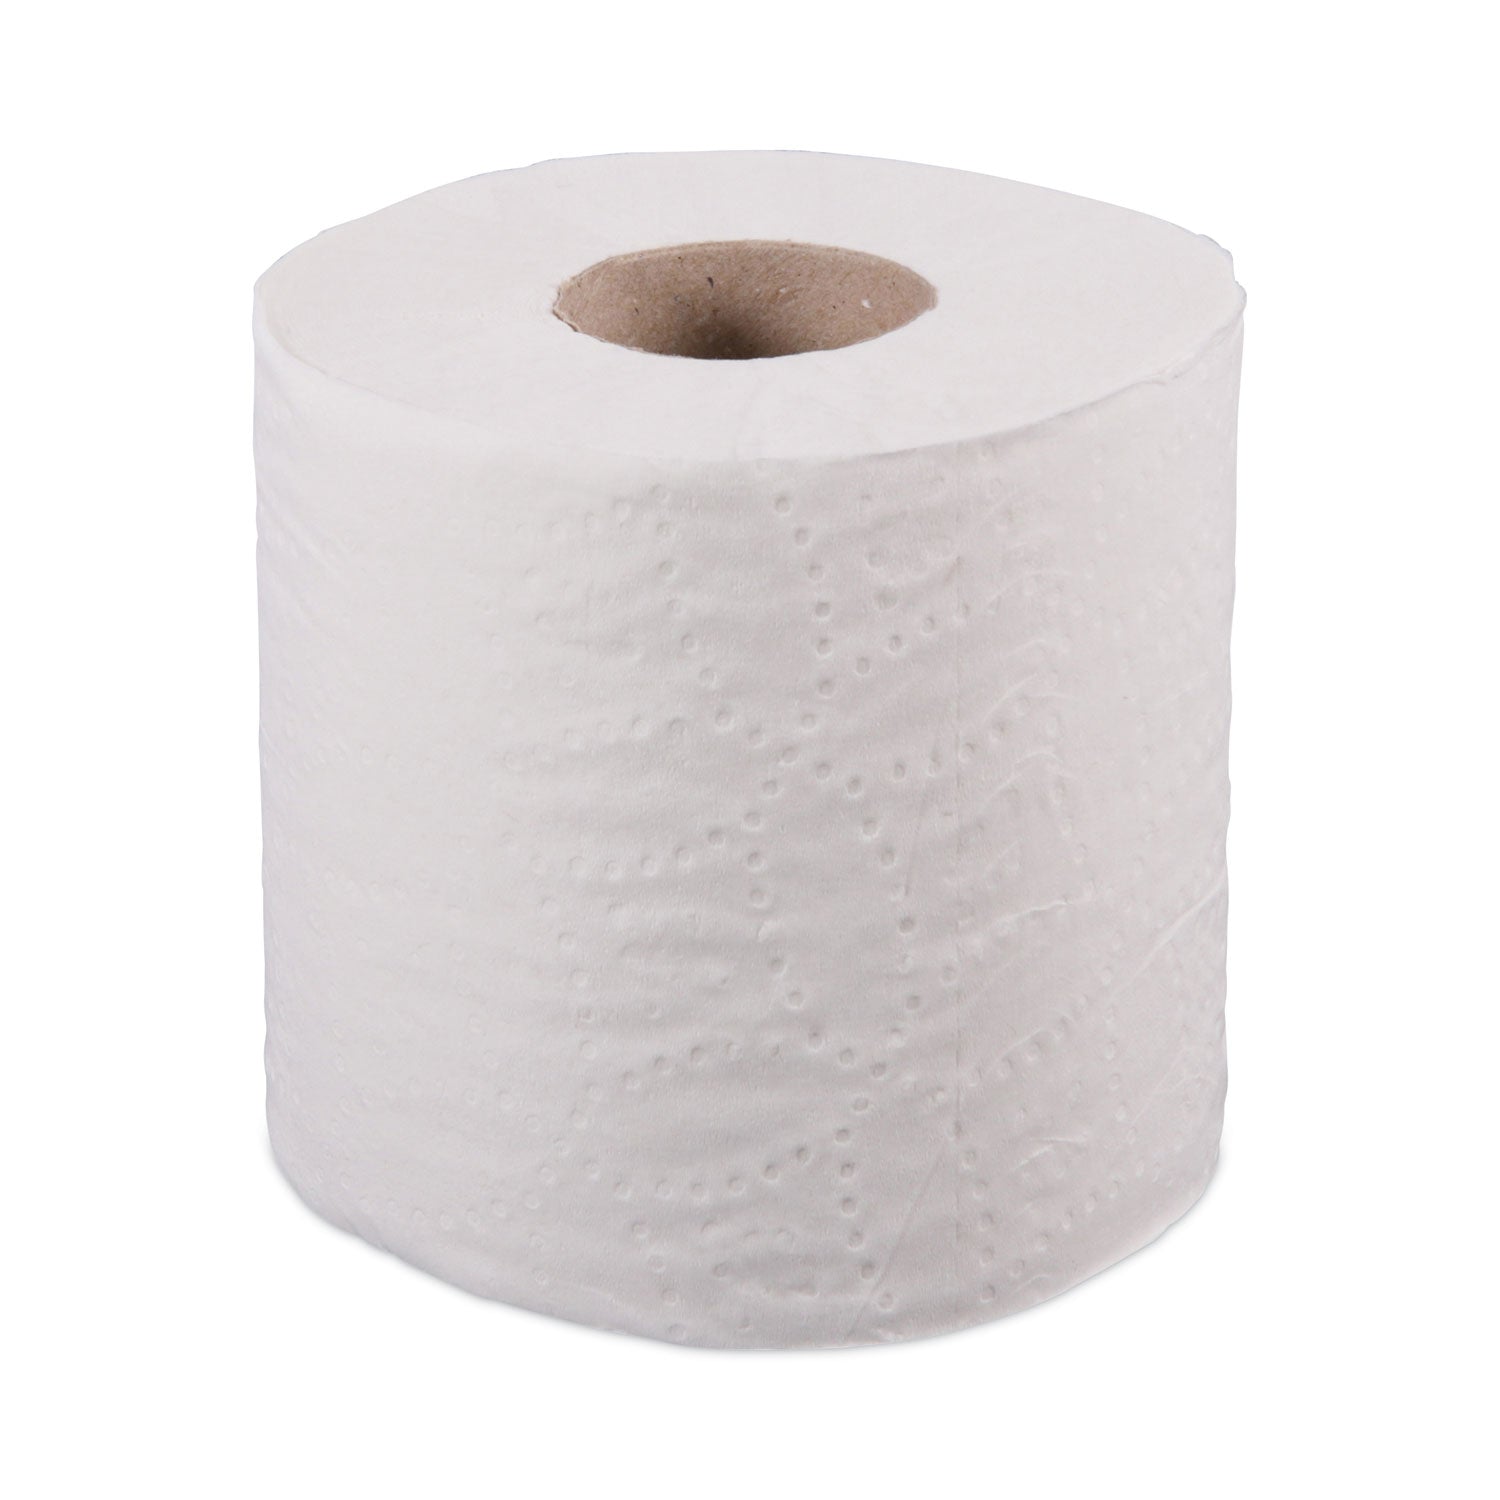 1-ply-toilet-tissue-septic-safe-white-1000-sheets-96-rolls-carton_bwk6170b - 2